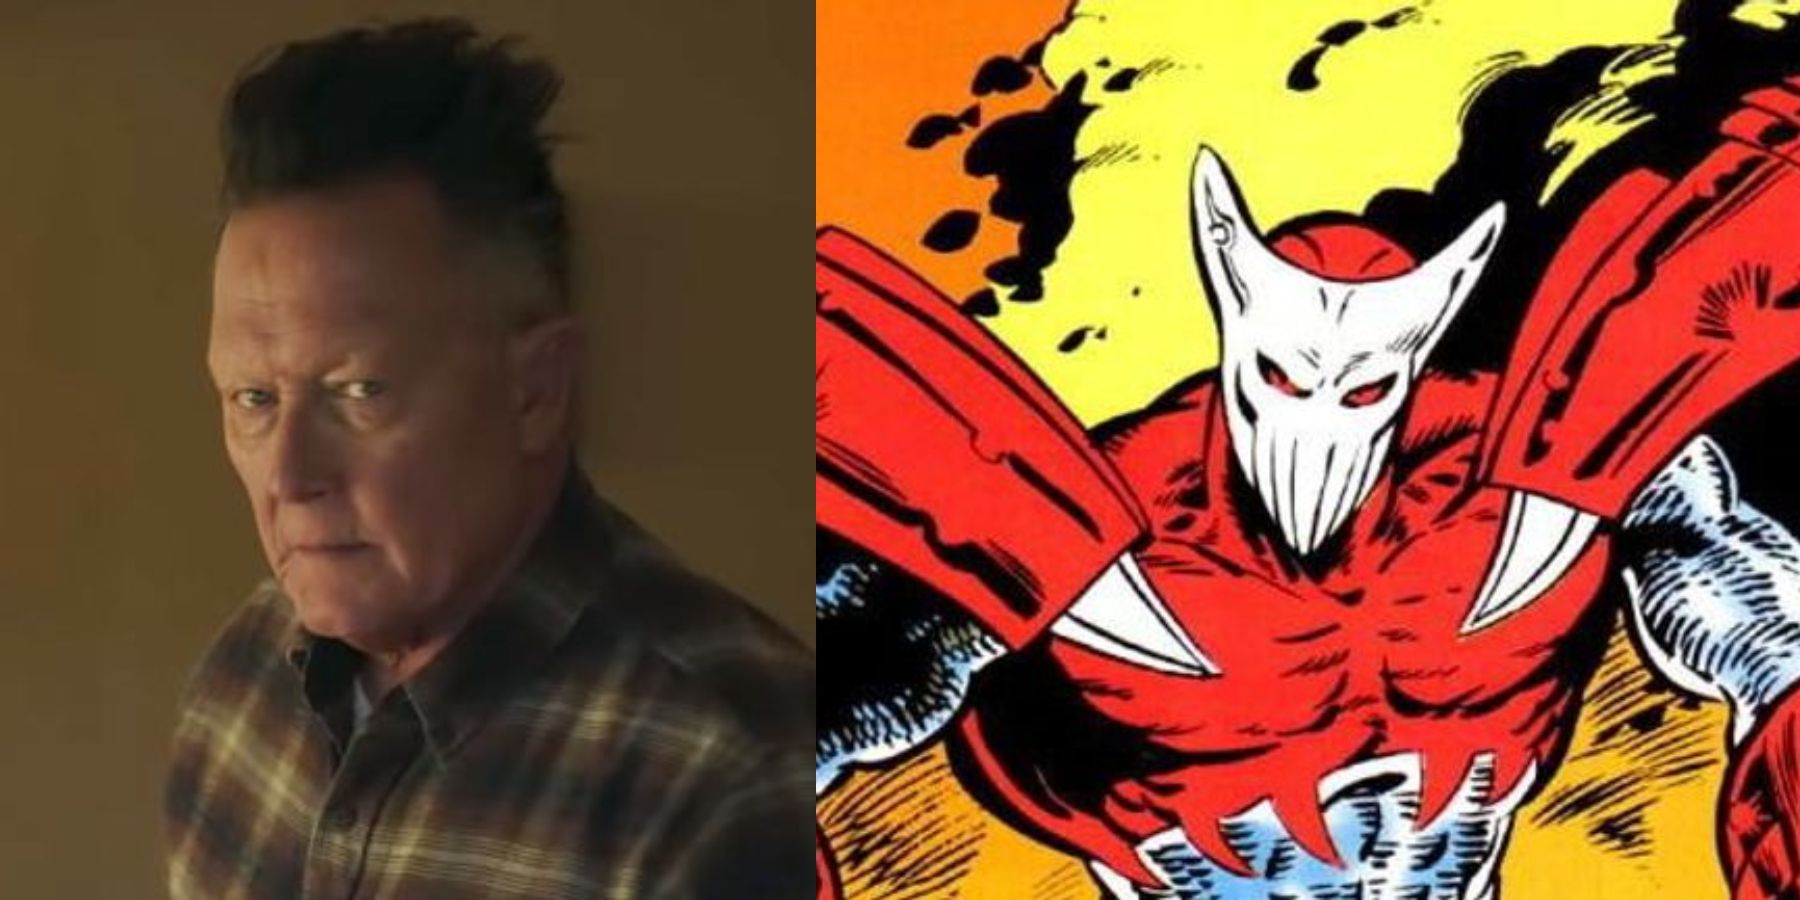 A split image depicts Auggie Smith in Peacemaker and White Dragon in DC Comics